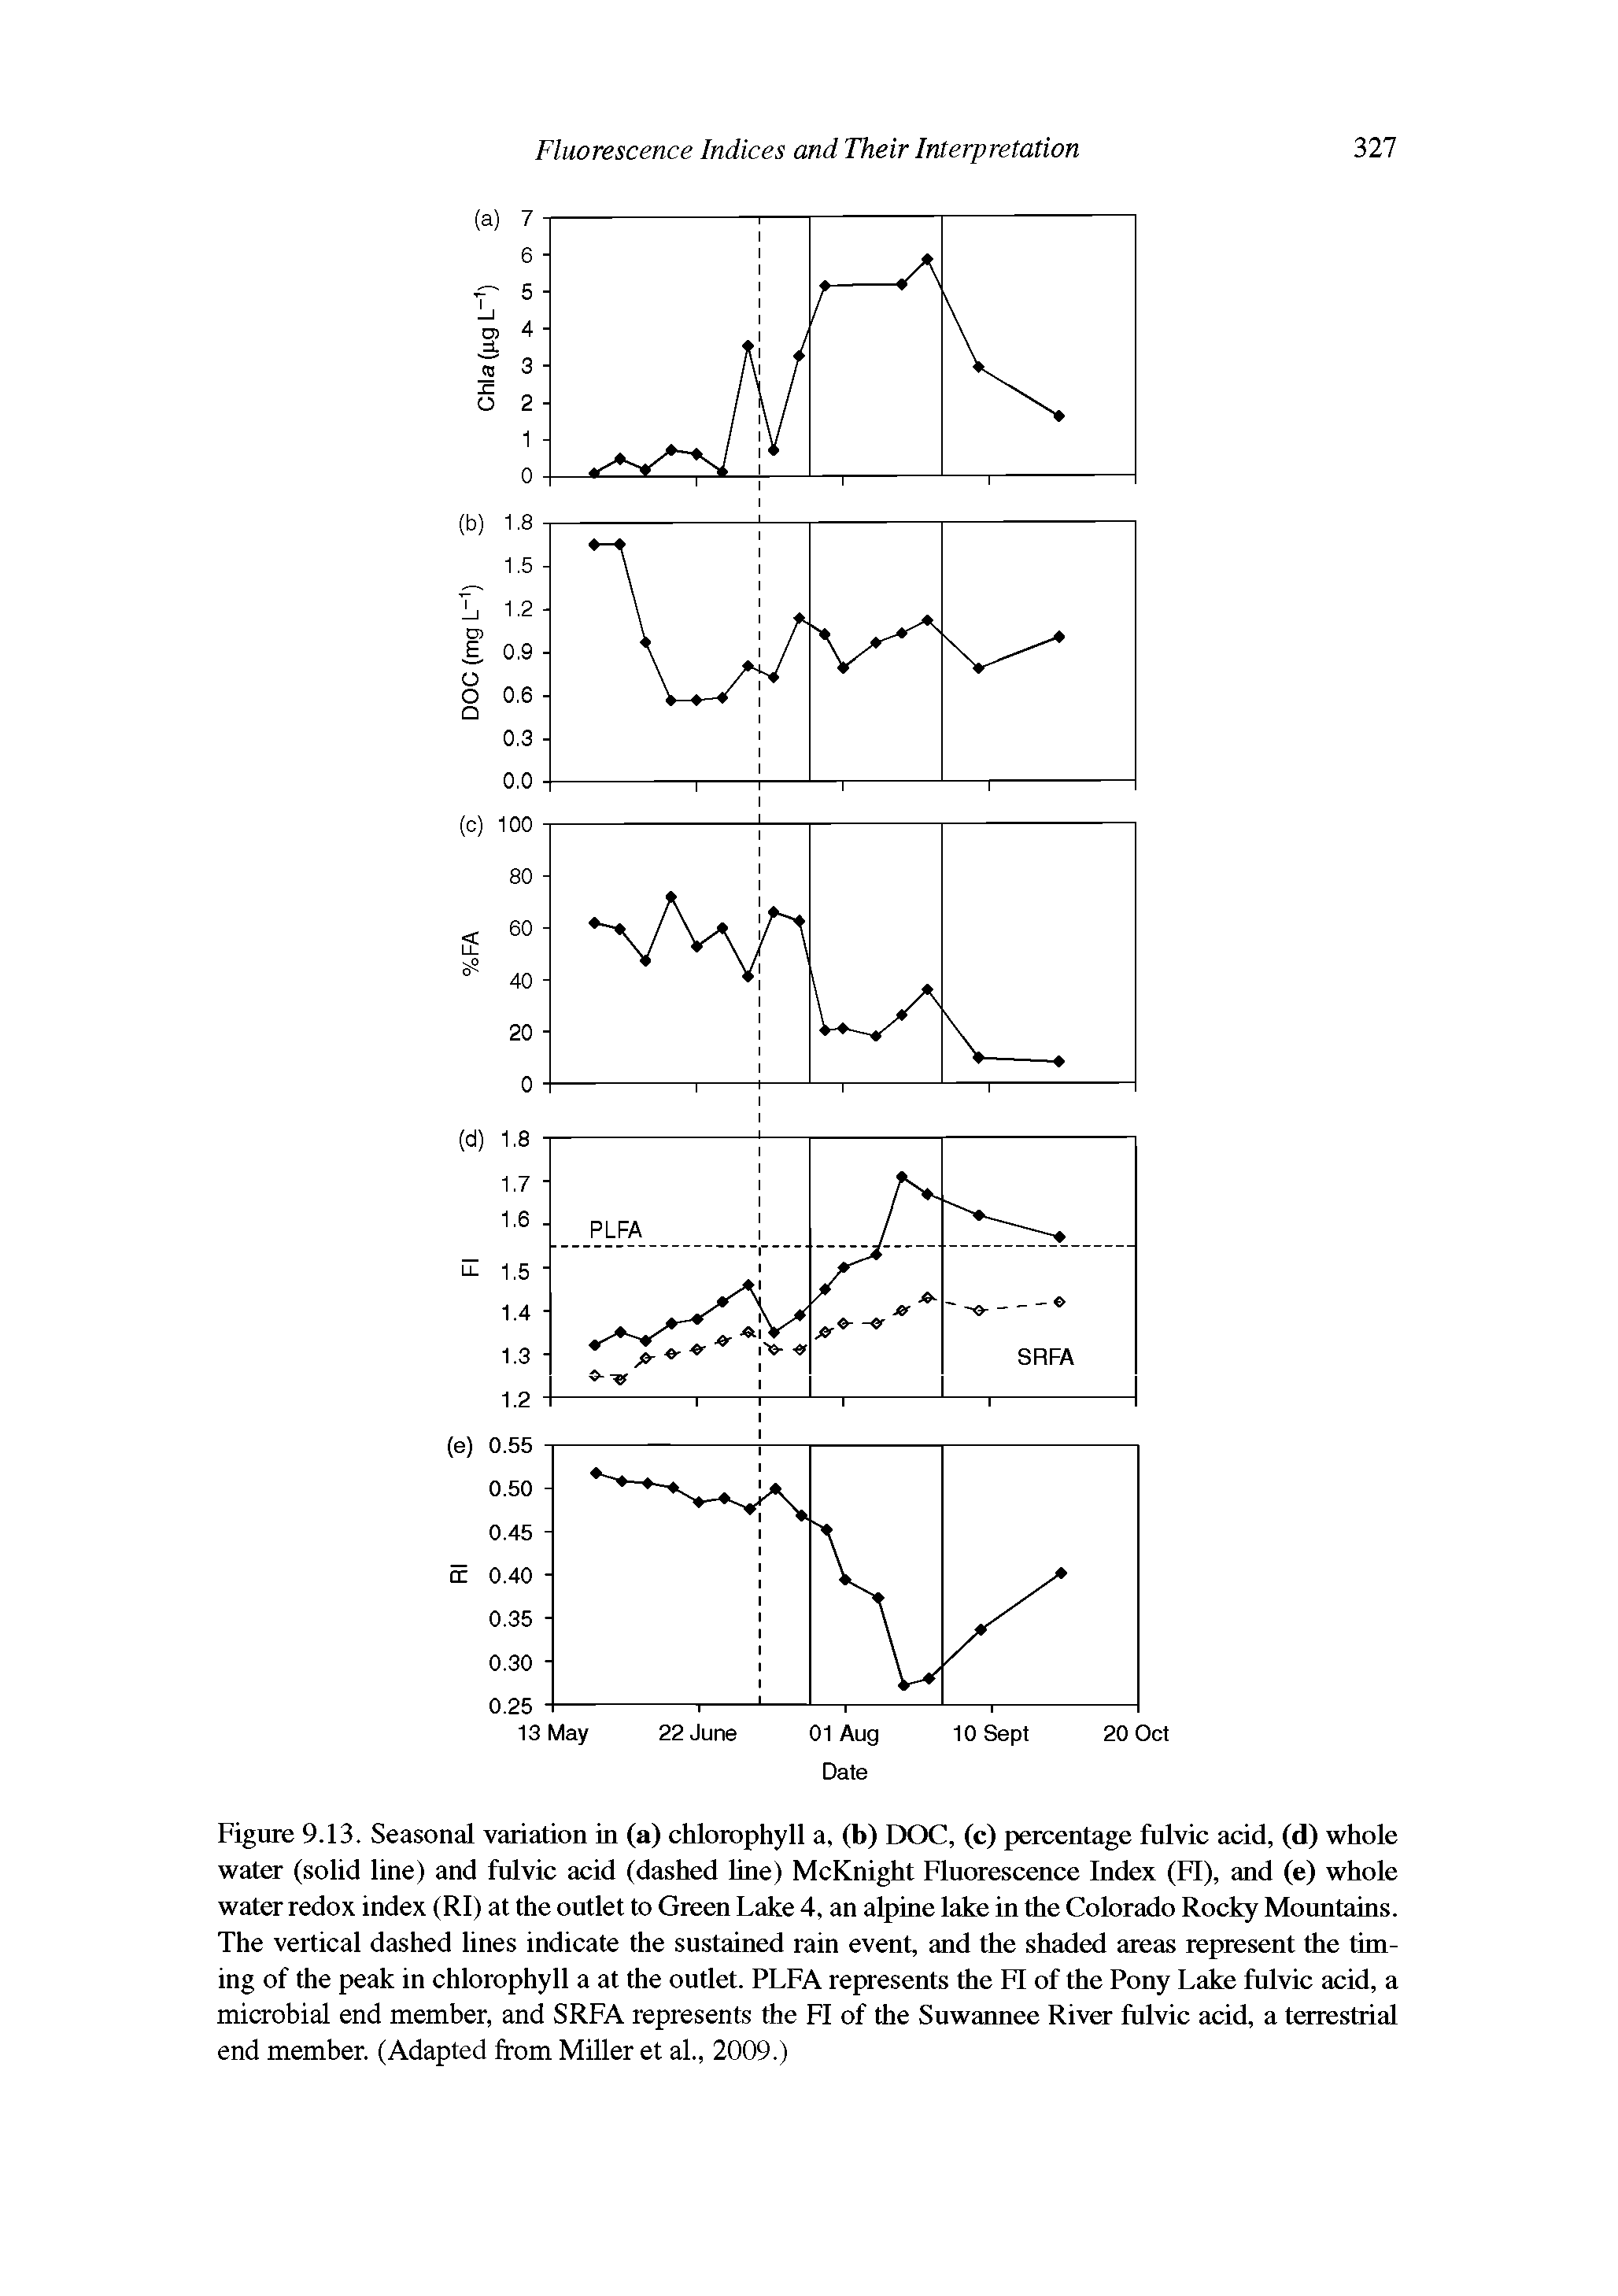 Figure 9.13. Seasonal variation in (a) chlorophyll a, (b) DOC, (c) percentage fulvic acid, (d) whole water (solid line) and fulvic acid (dashed hue) McKnight Fluorescence Index (FI), and (e) whole water redox index (RI) at the outlet to Green Lake 4, an alpine lake in the Colorado Rocky Mountains. The vertical dashed lines indicate the sustained rain event, and the shaded areas represent the timing of the peak in chlorophyll a at the outlet. PLFA represents the FI of the Pony Lake fulvic acid, a microbial end member, and SRFA represents the FI of the Suwannee River fulvic acid, a terrestrial end member. (Adapted from MiUer et al., 2009.)...